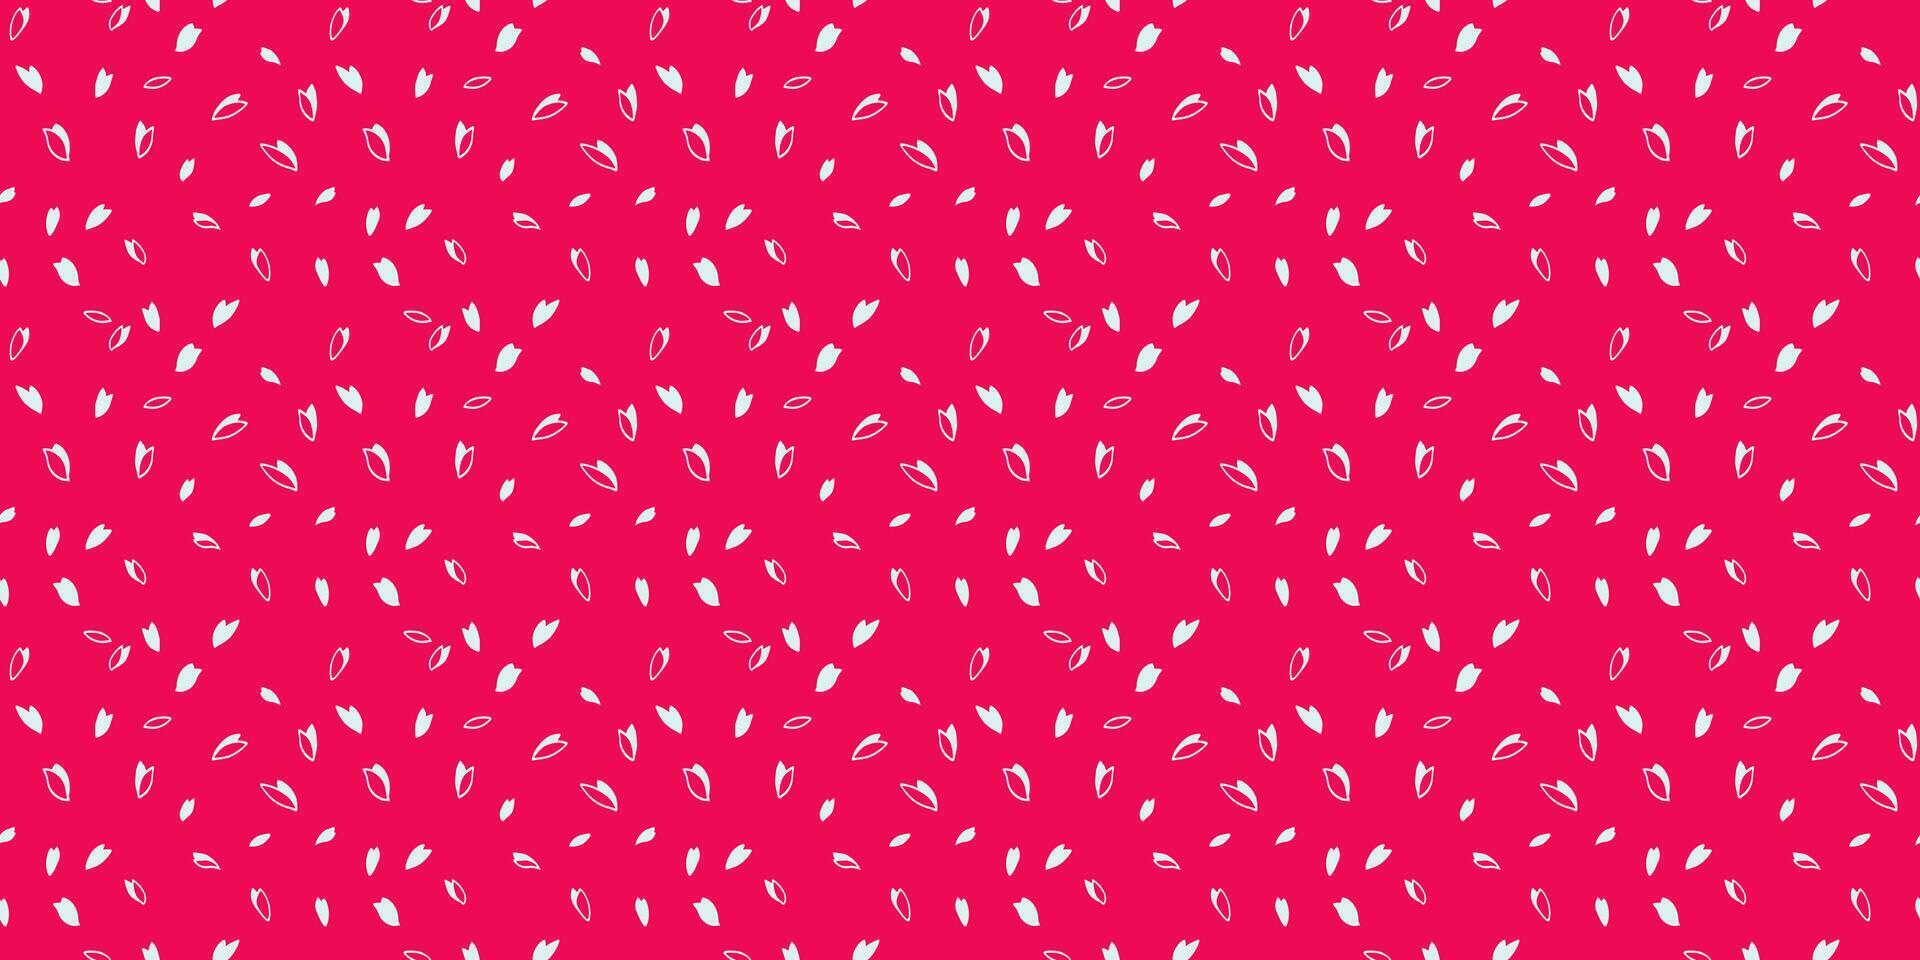 Simple creative vibrant polka dots, drops seamless pattern. Random dot, snowflakes, circles, leaflets on a red background. Vector hand drawn sketch shape. Design for fabric, textile,surface design